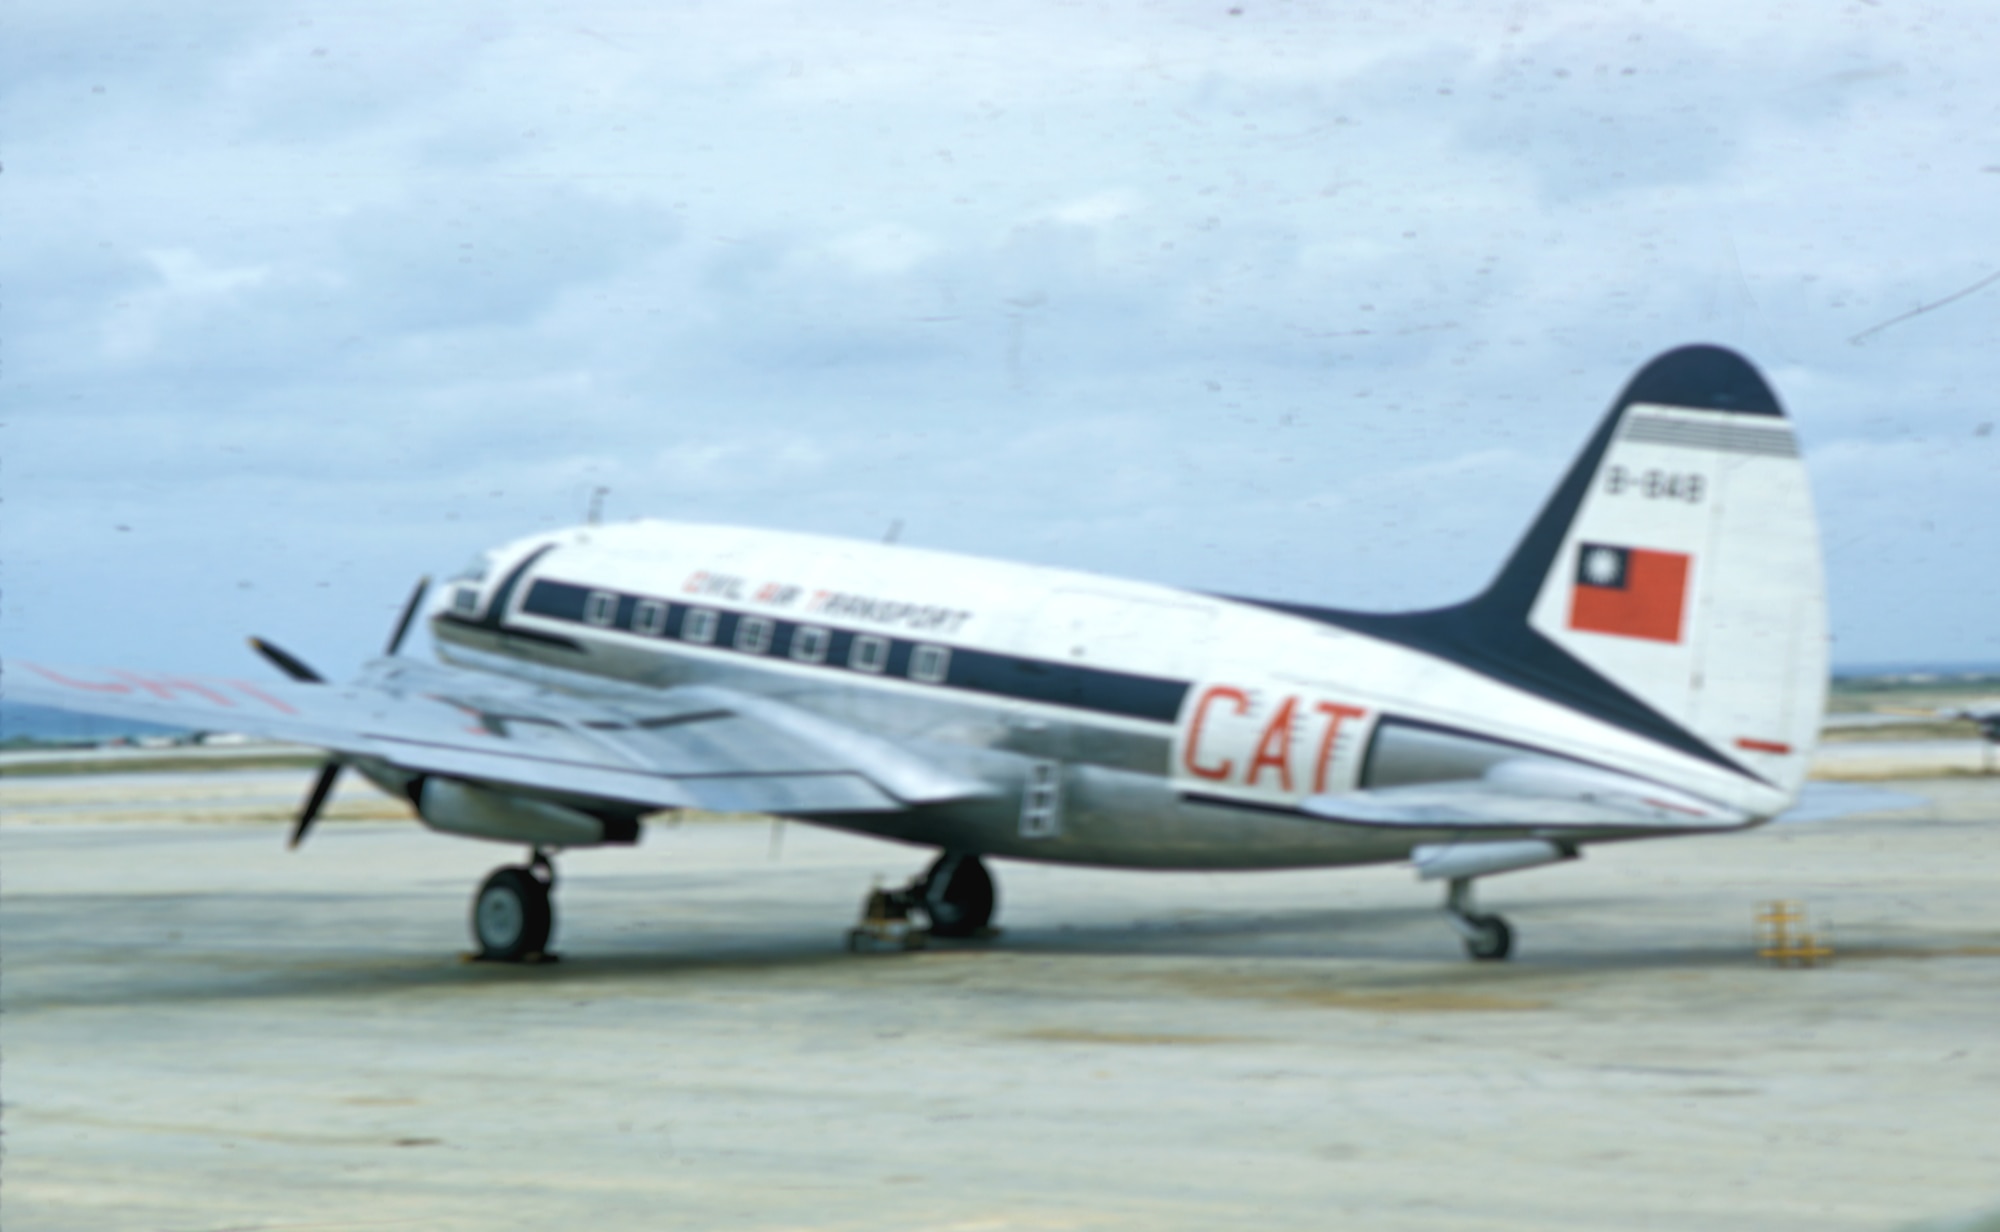 CIA-affiliated Civil Air Transport (CAT), forerunner of Air America, flew support missions for the French at Dien Bien Phu using C-119s, and elsewhere in Indochina with other aircraft like this C-46. (U.S. Air Force photo)